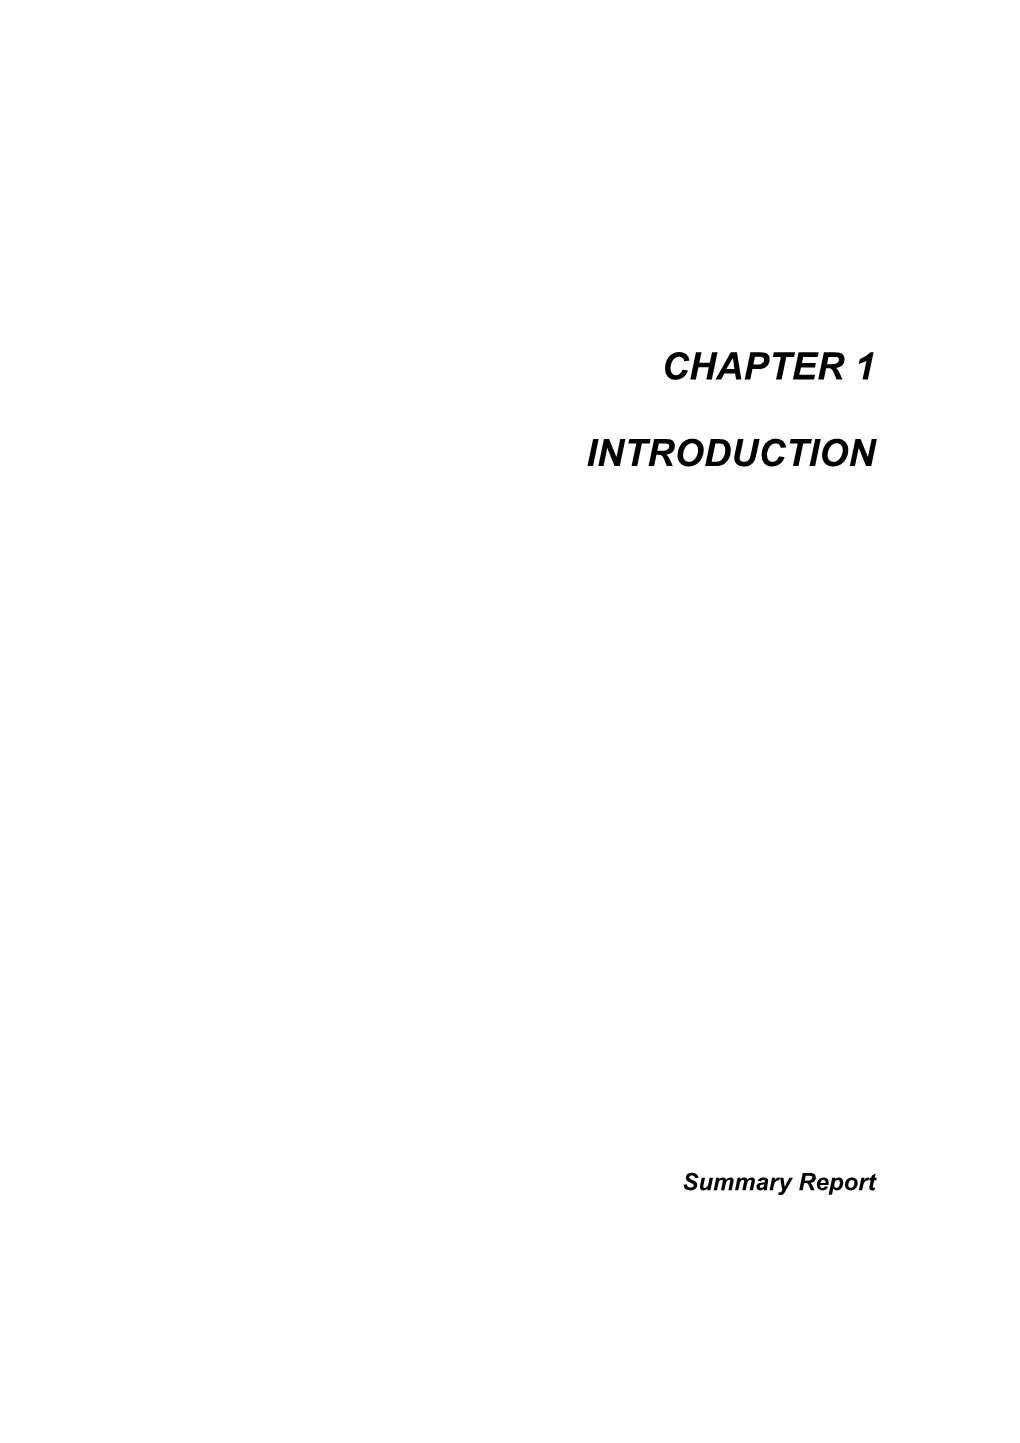 Chapter 1 Introduction Summary Report CHAPTER 1 INTRODUCTION